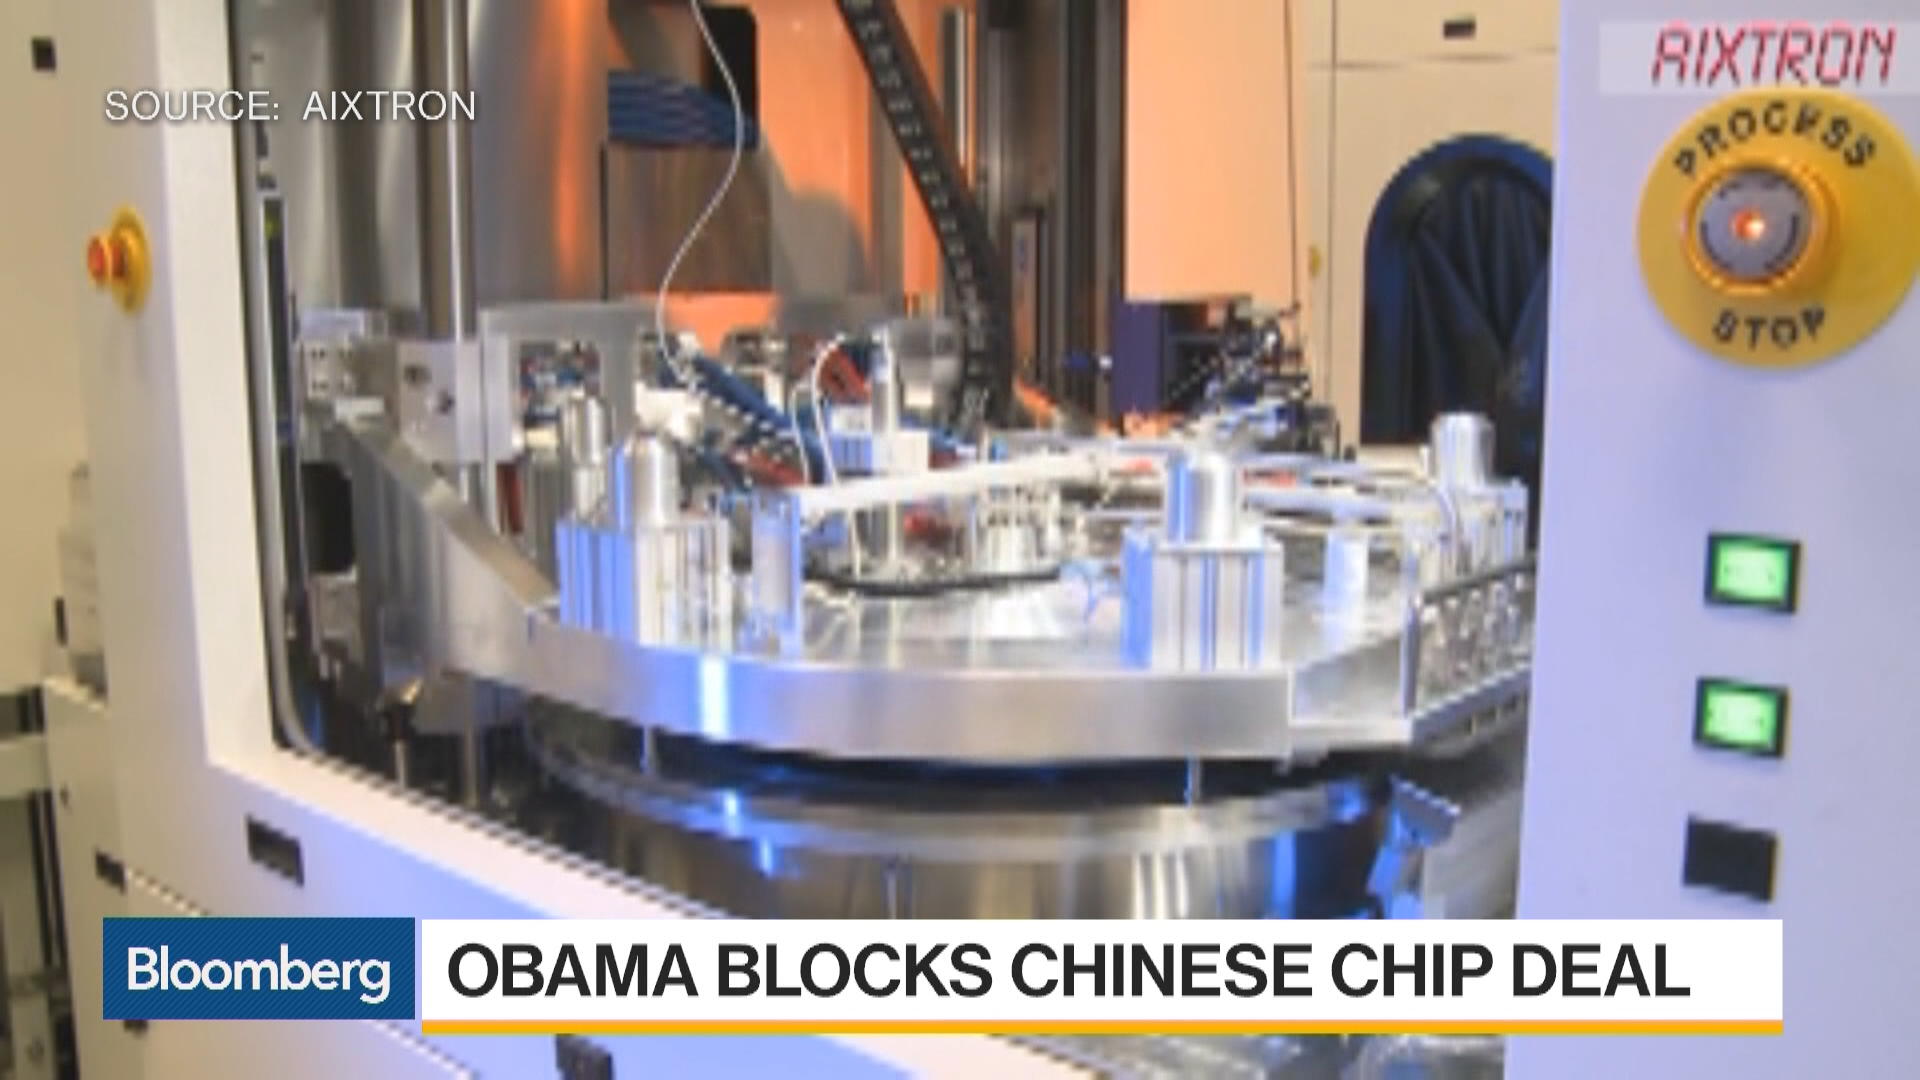 Aixtron Sees Slim Path To Save China Sale After Obama Order Bloomberg